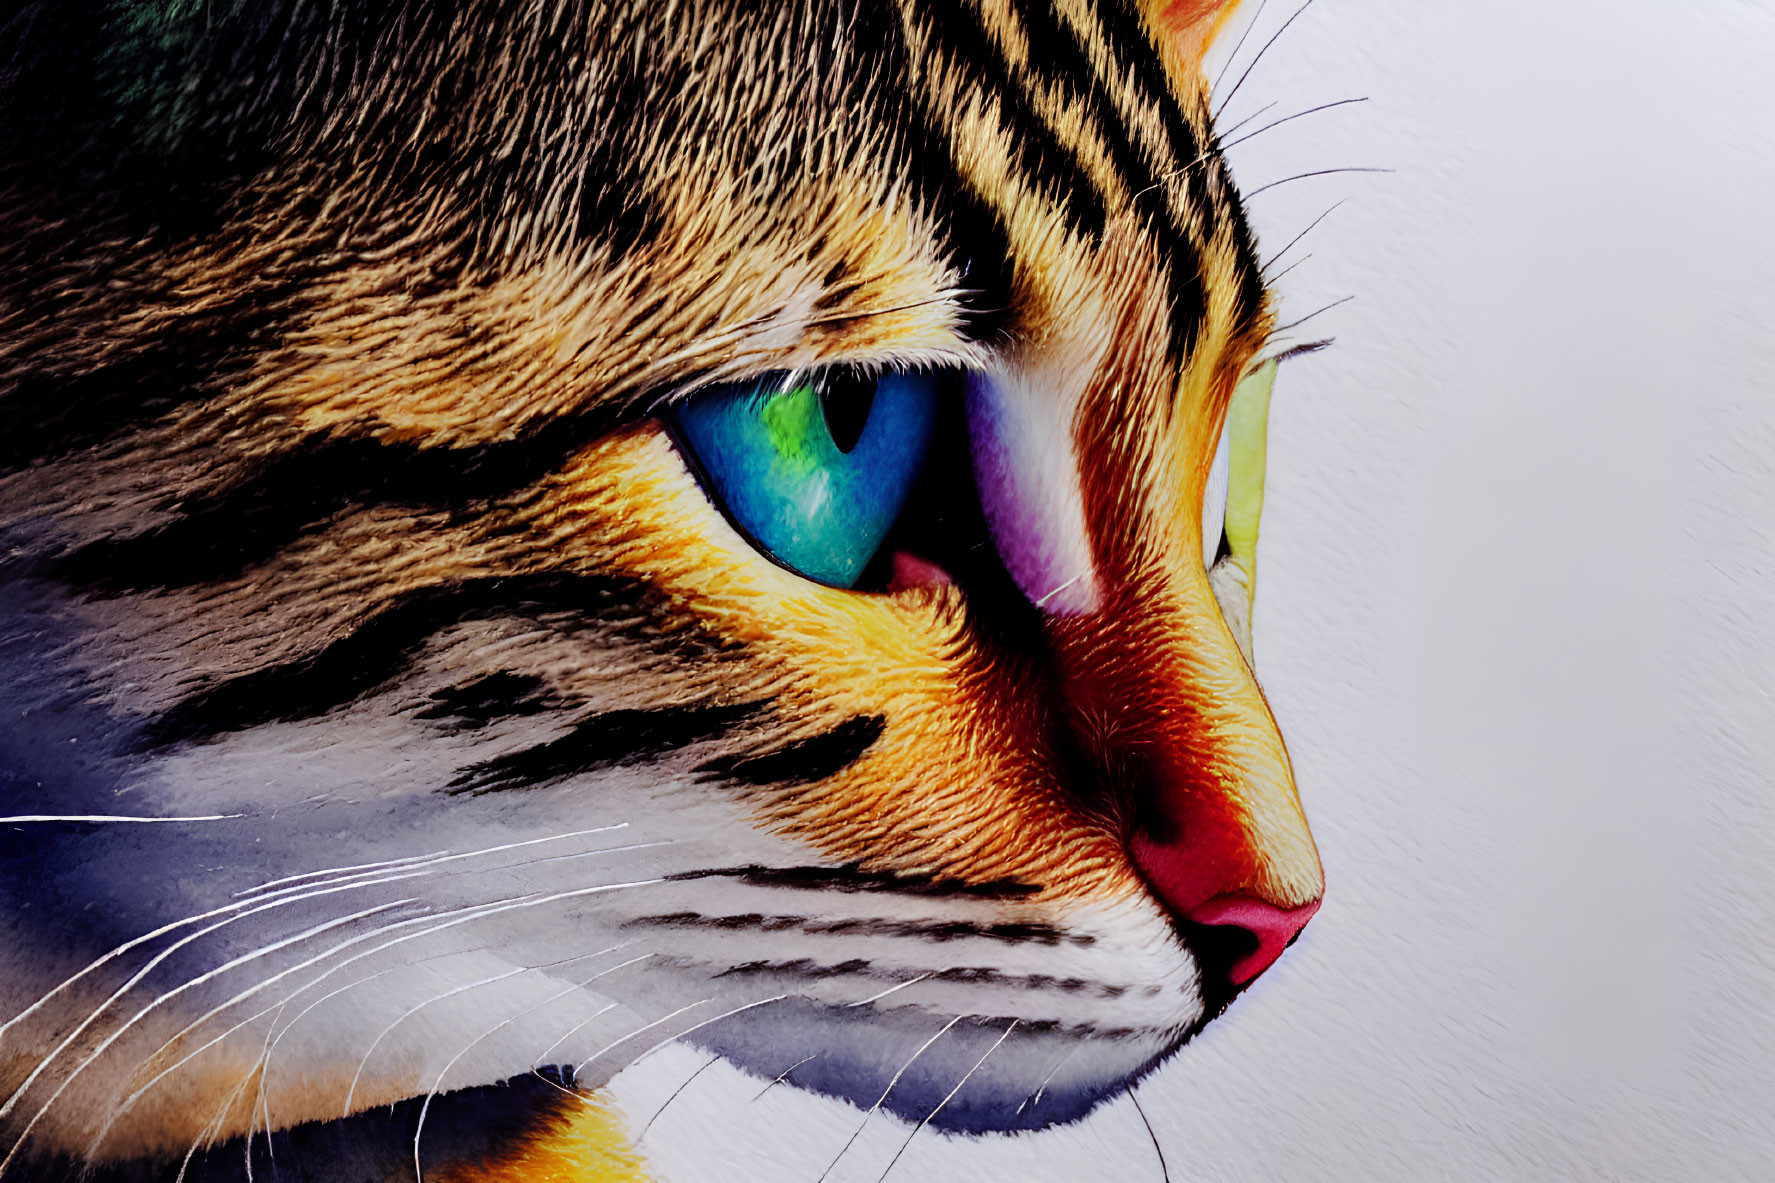 Colorful Cat Artwork with Vibrant Eyes and Whiskers on White Background